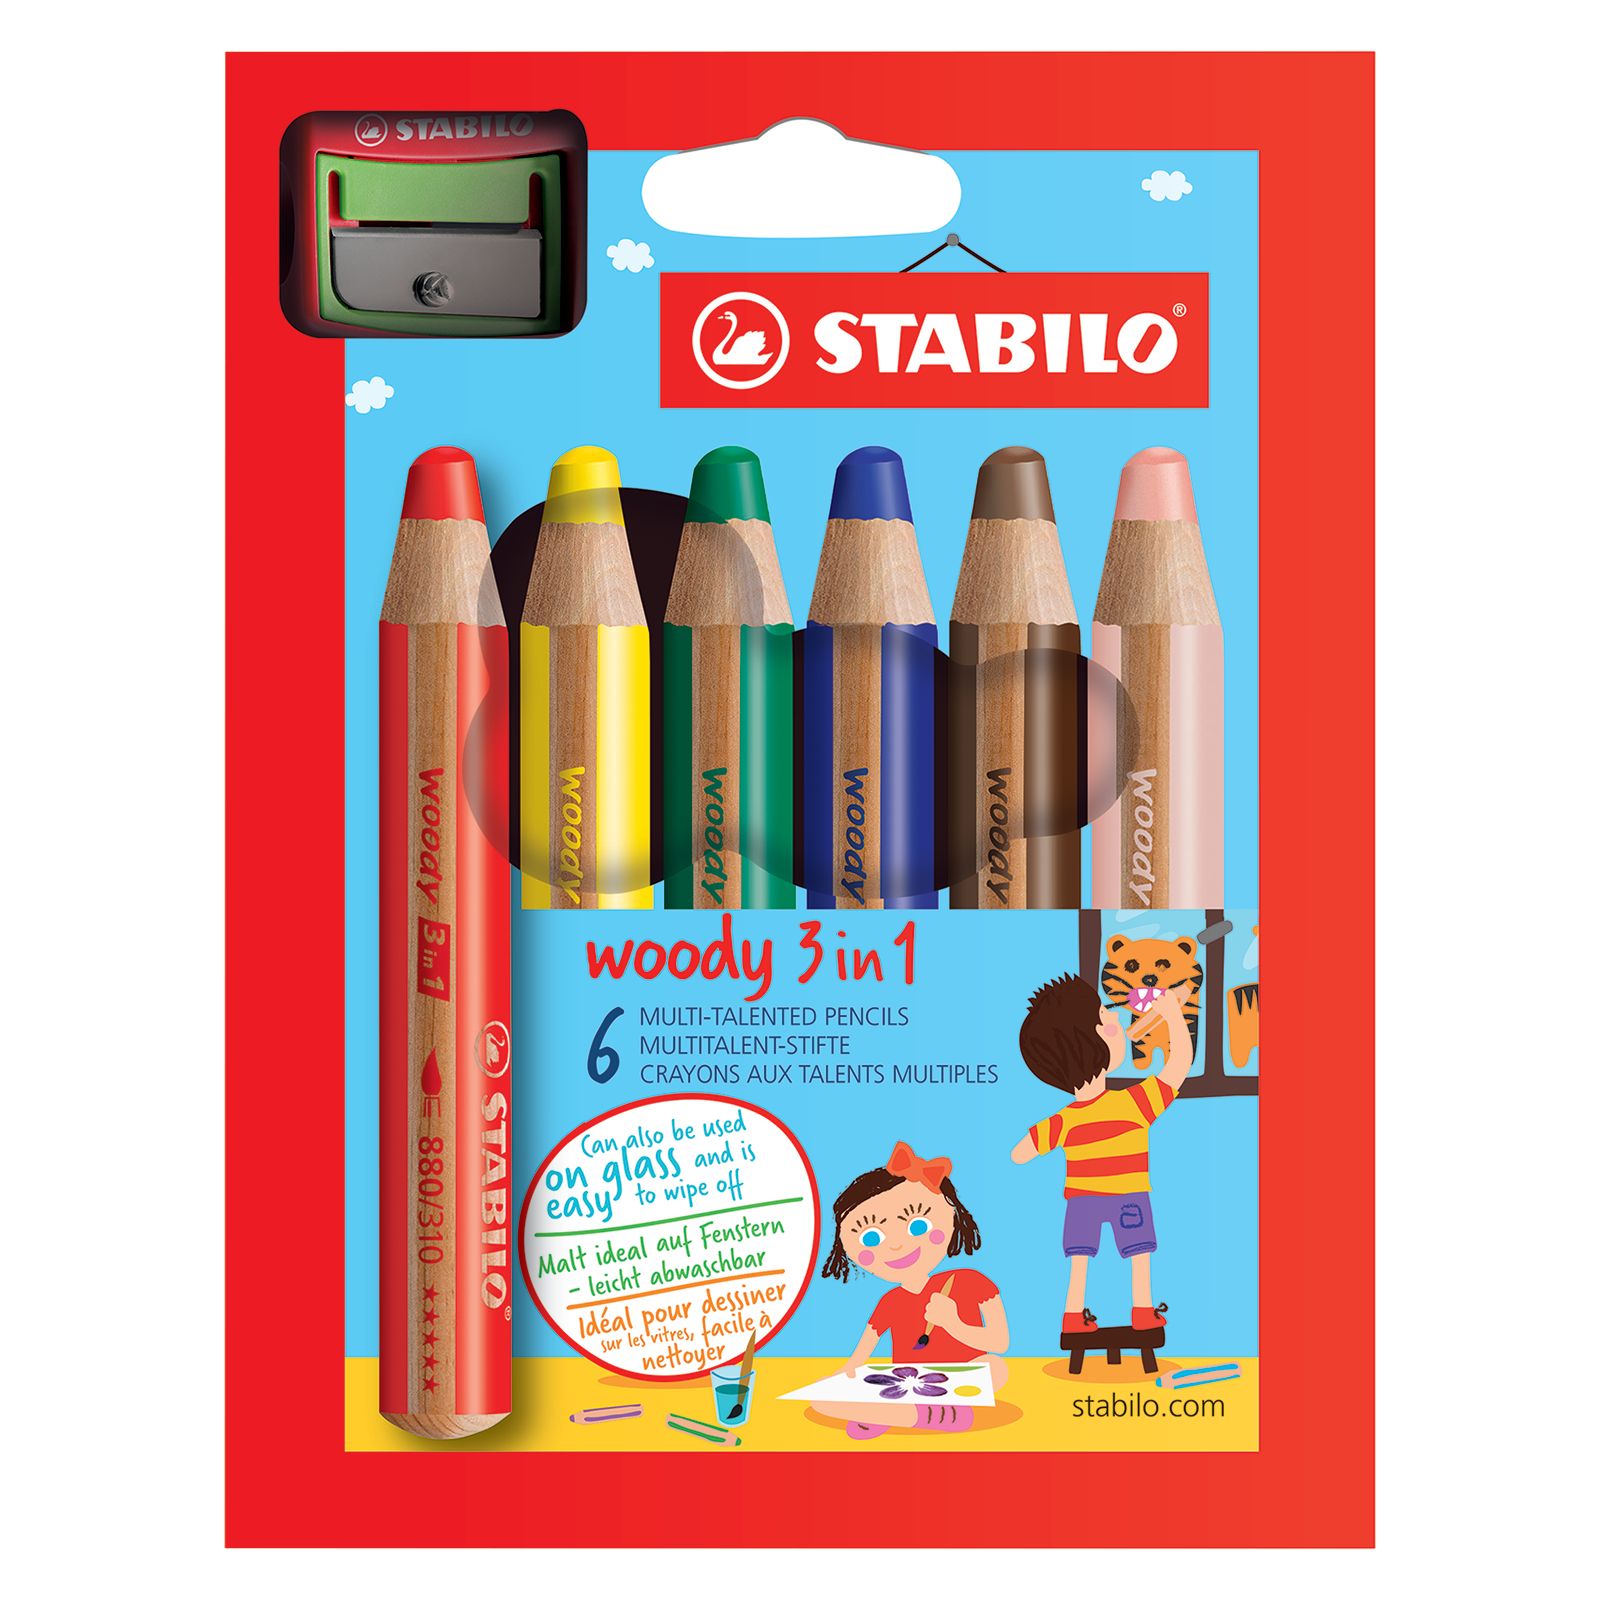 Woody 3 in 1 Pencil Sets - FLAX art & design